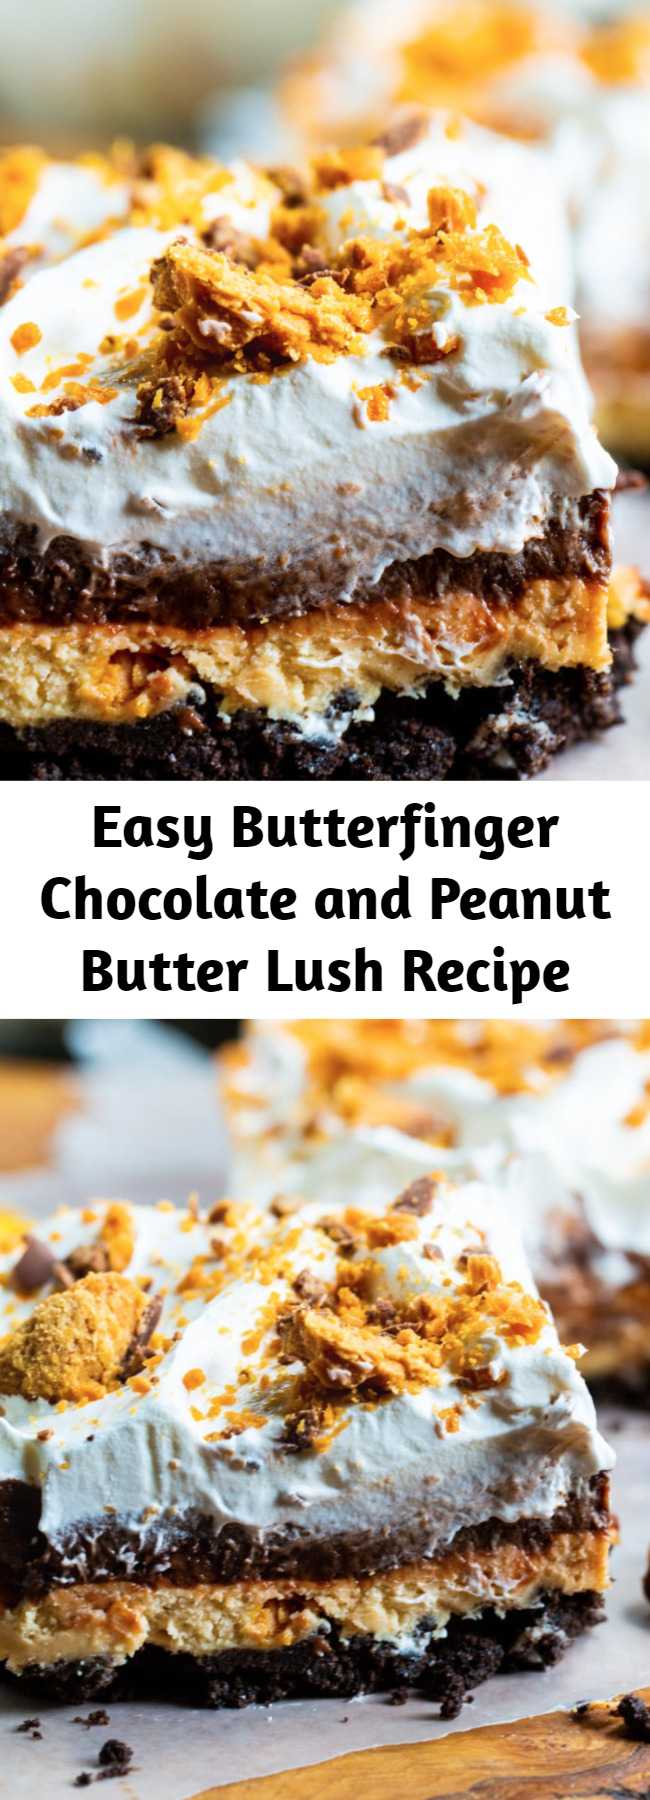 Easy Butterfinger Chocolate and Peanut Butter Lush Recipe - So many delicious, creamy layers and the buttery crunch of Butterfinger candy. You won't find a more delicious dessert than this cool and creamy Butterfinger Chocolate and Peanut Butter Lush. Layer after layer of heaven!